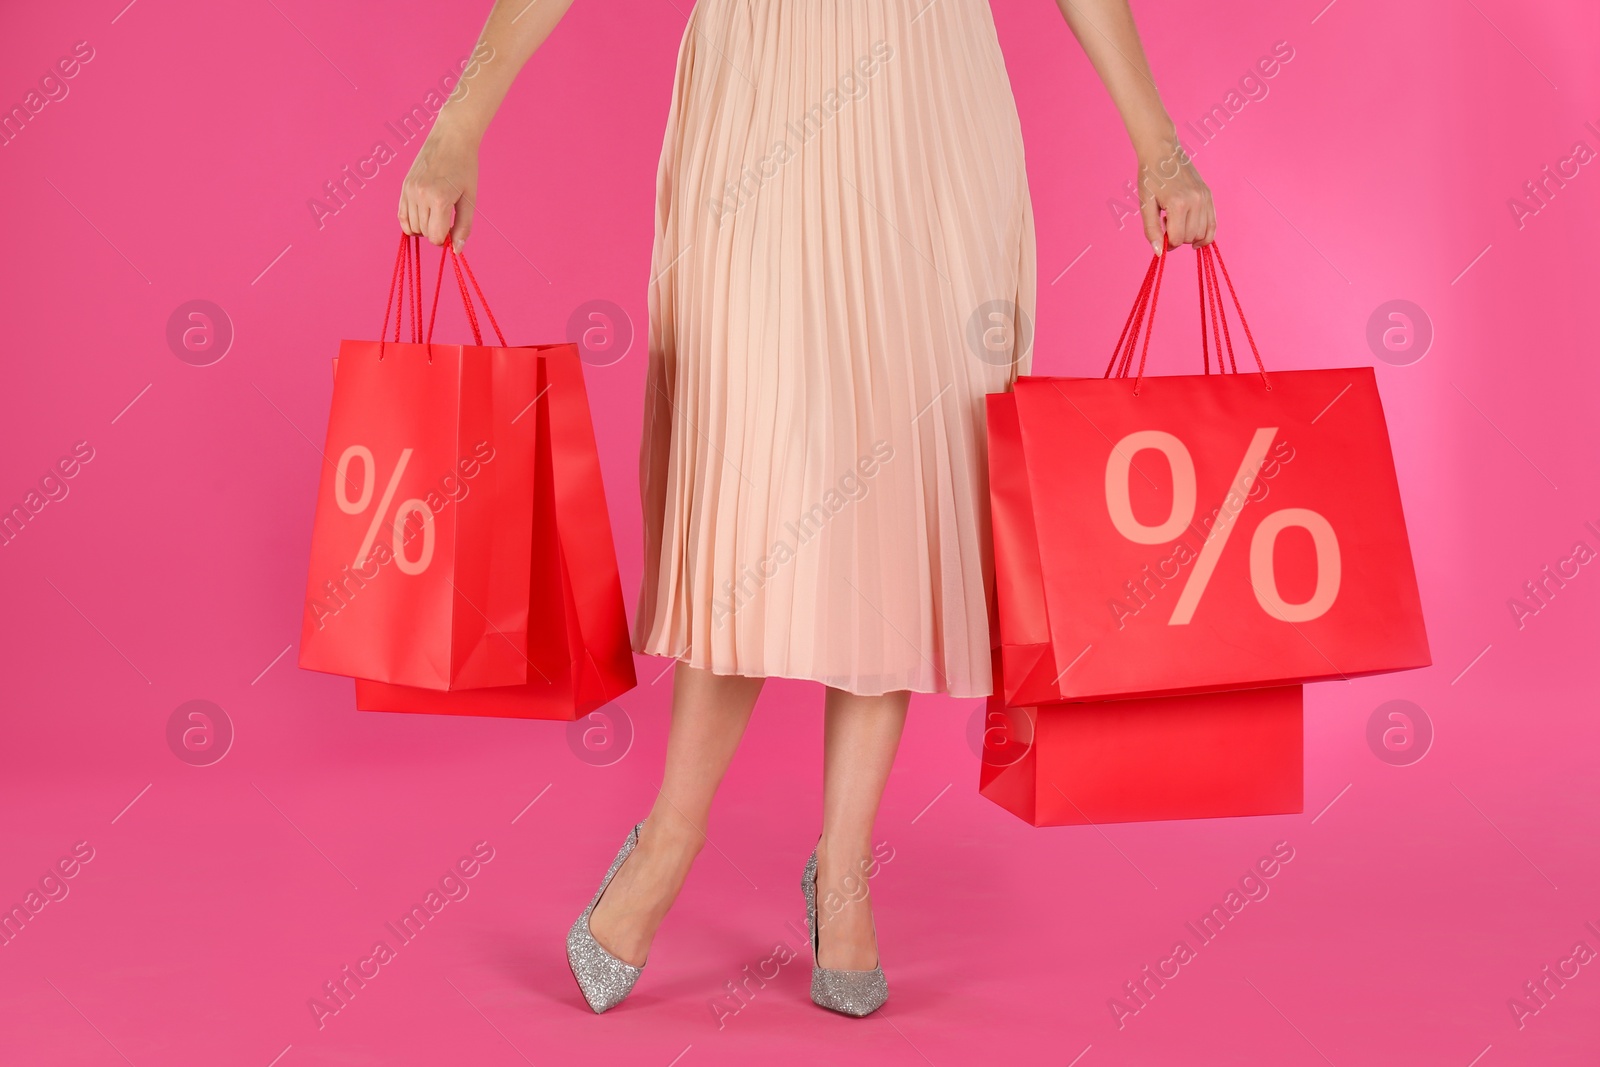 Image of Discount, sale, offer. Woman holding paper bags with percent signs against pink background, closeup